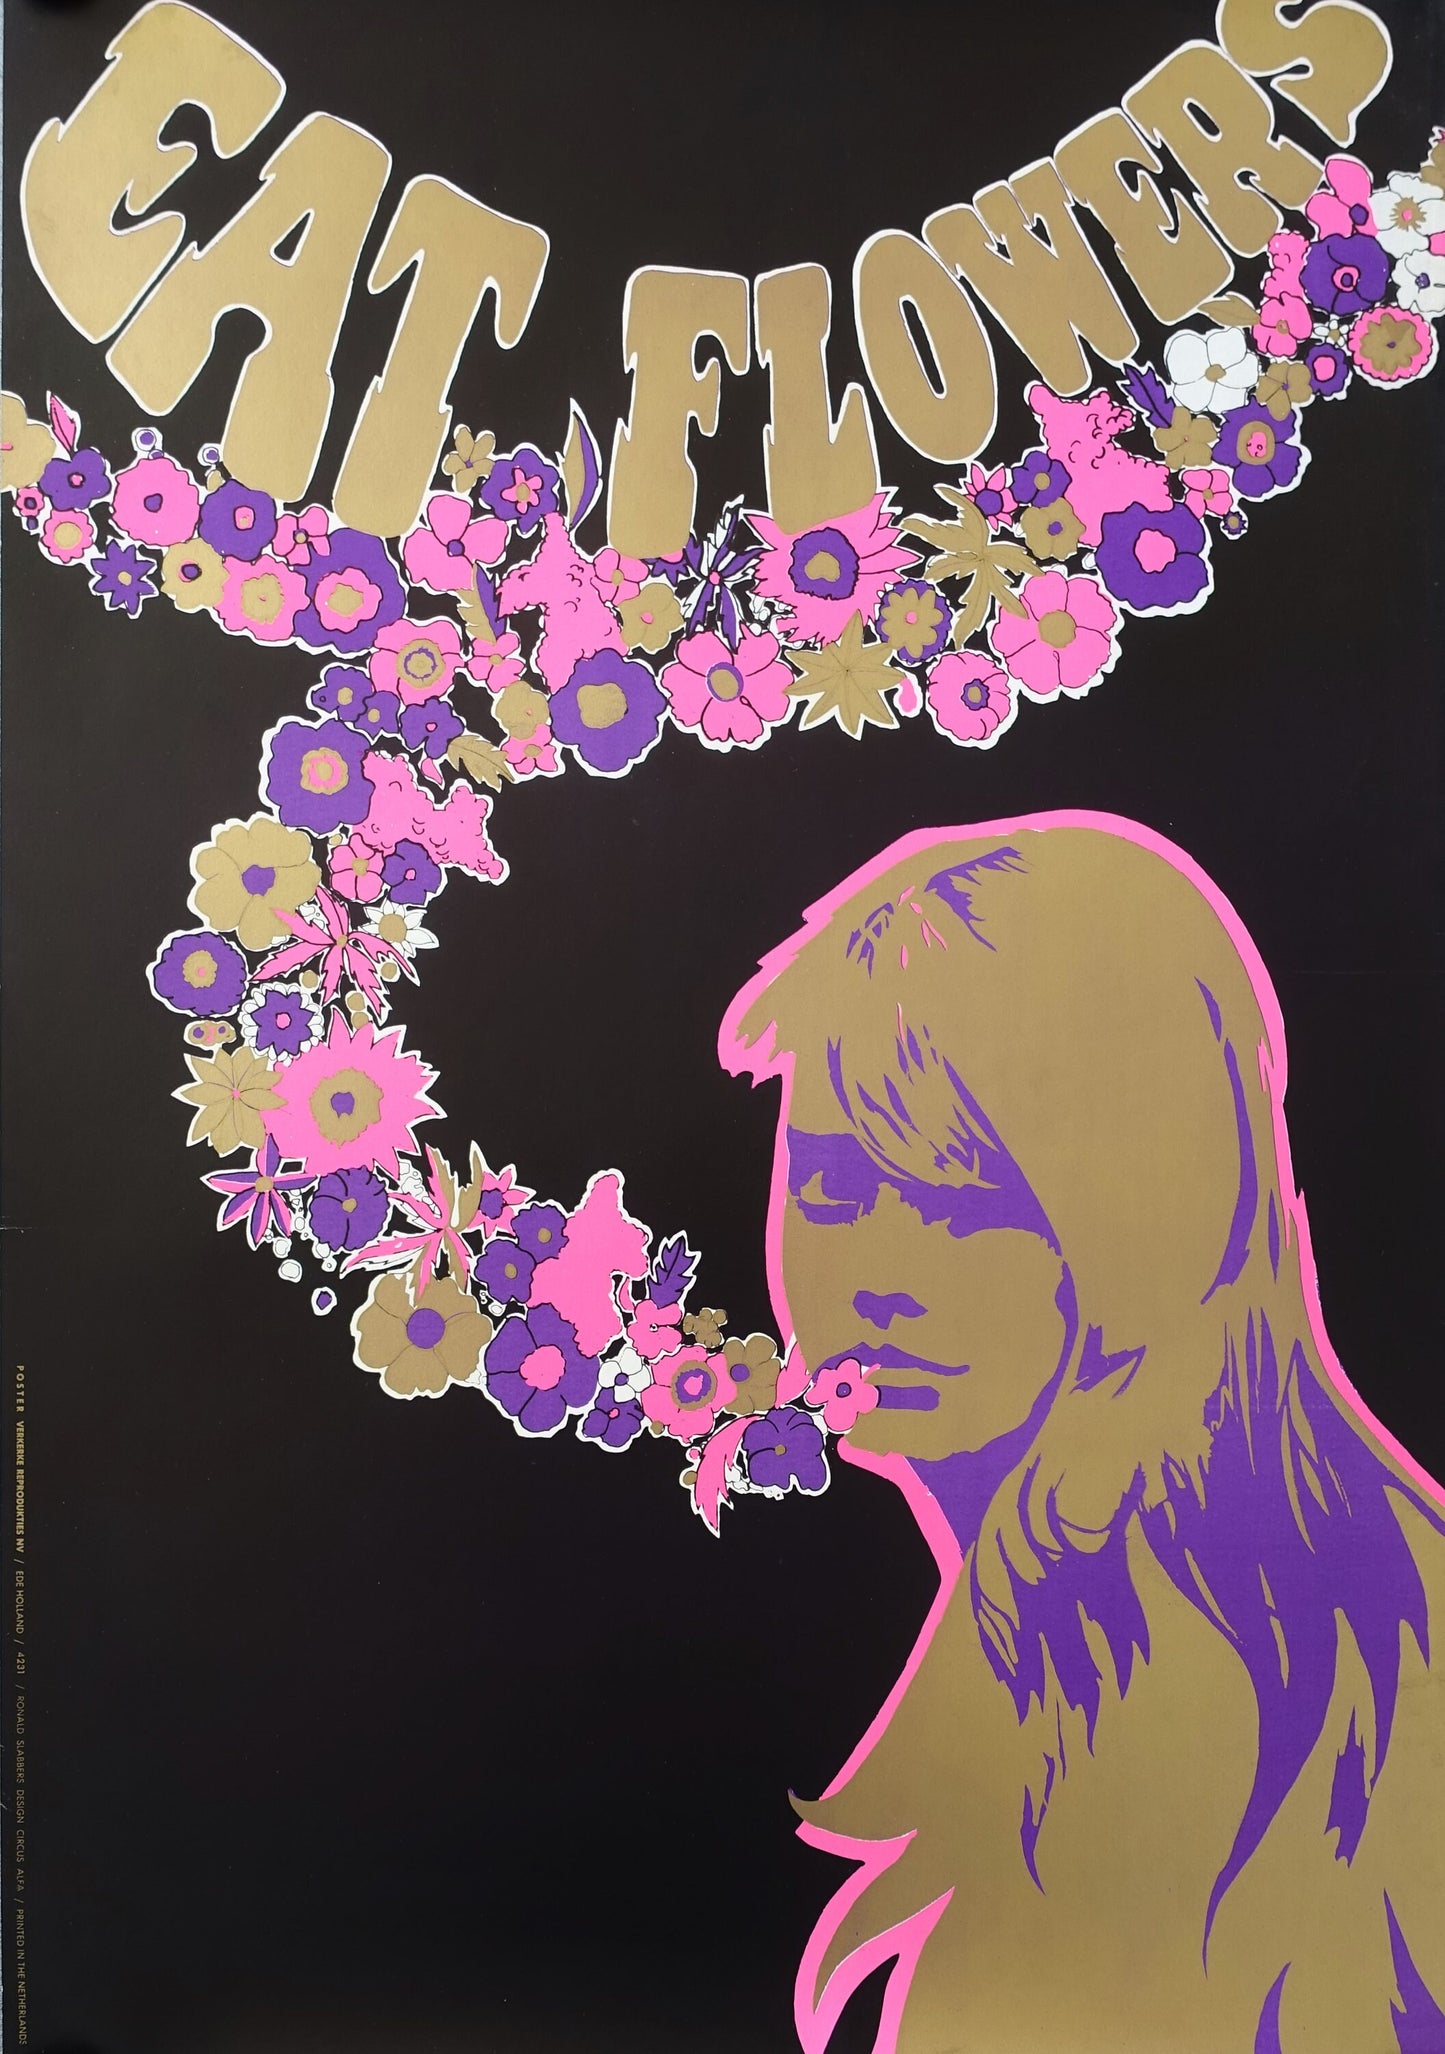 1968 Eat Flowers (Psychedelic Peace + Love Poster) - Original Vintage Poster